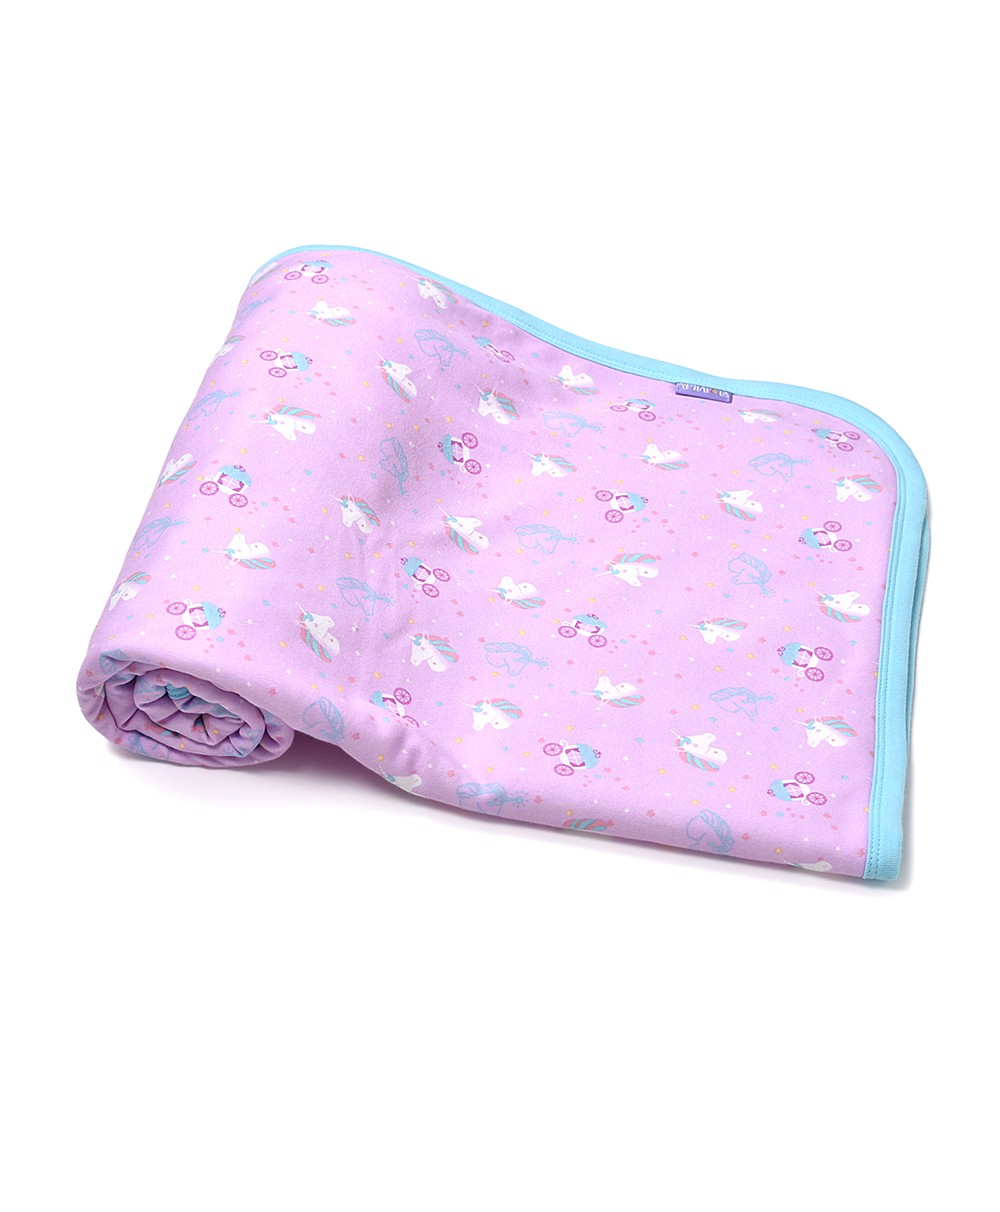 Finding It Difficult to Get the Best Baby Blanket for Your Newborn?